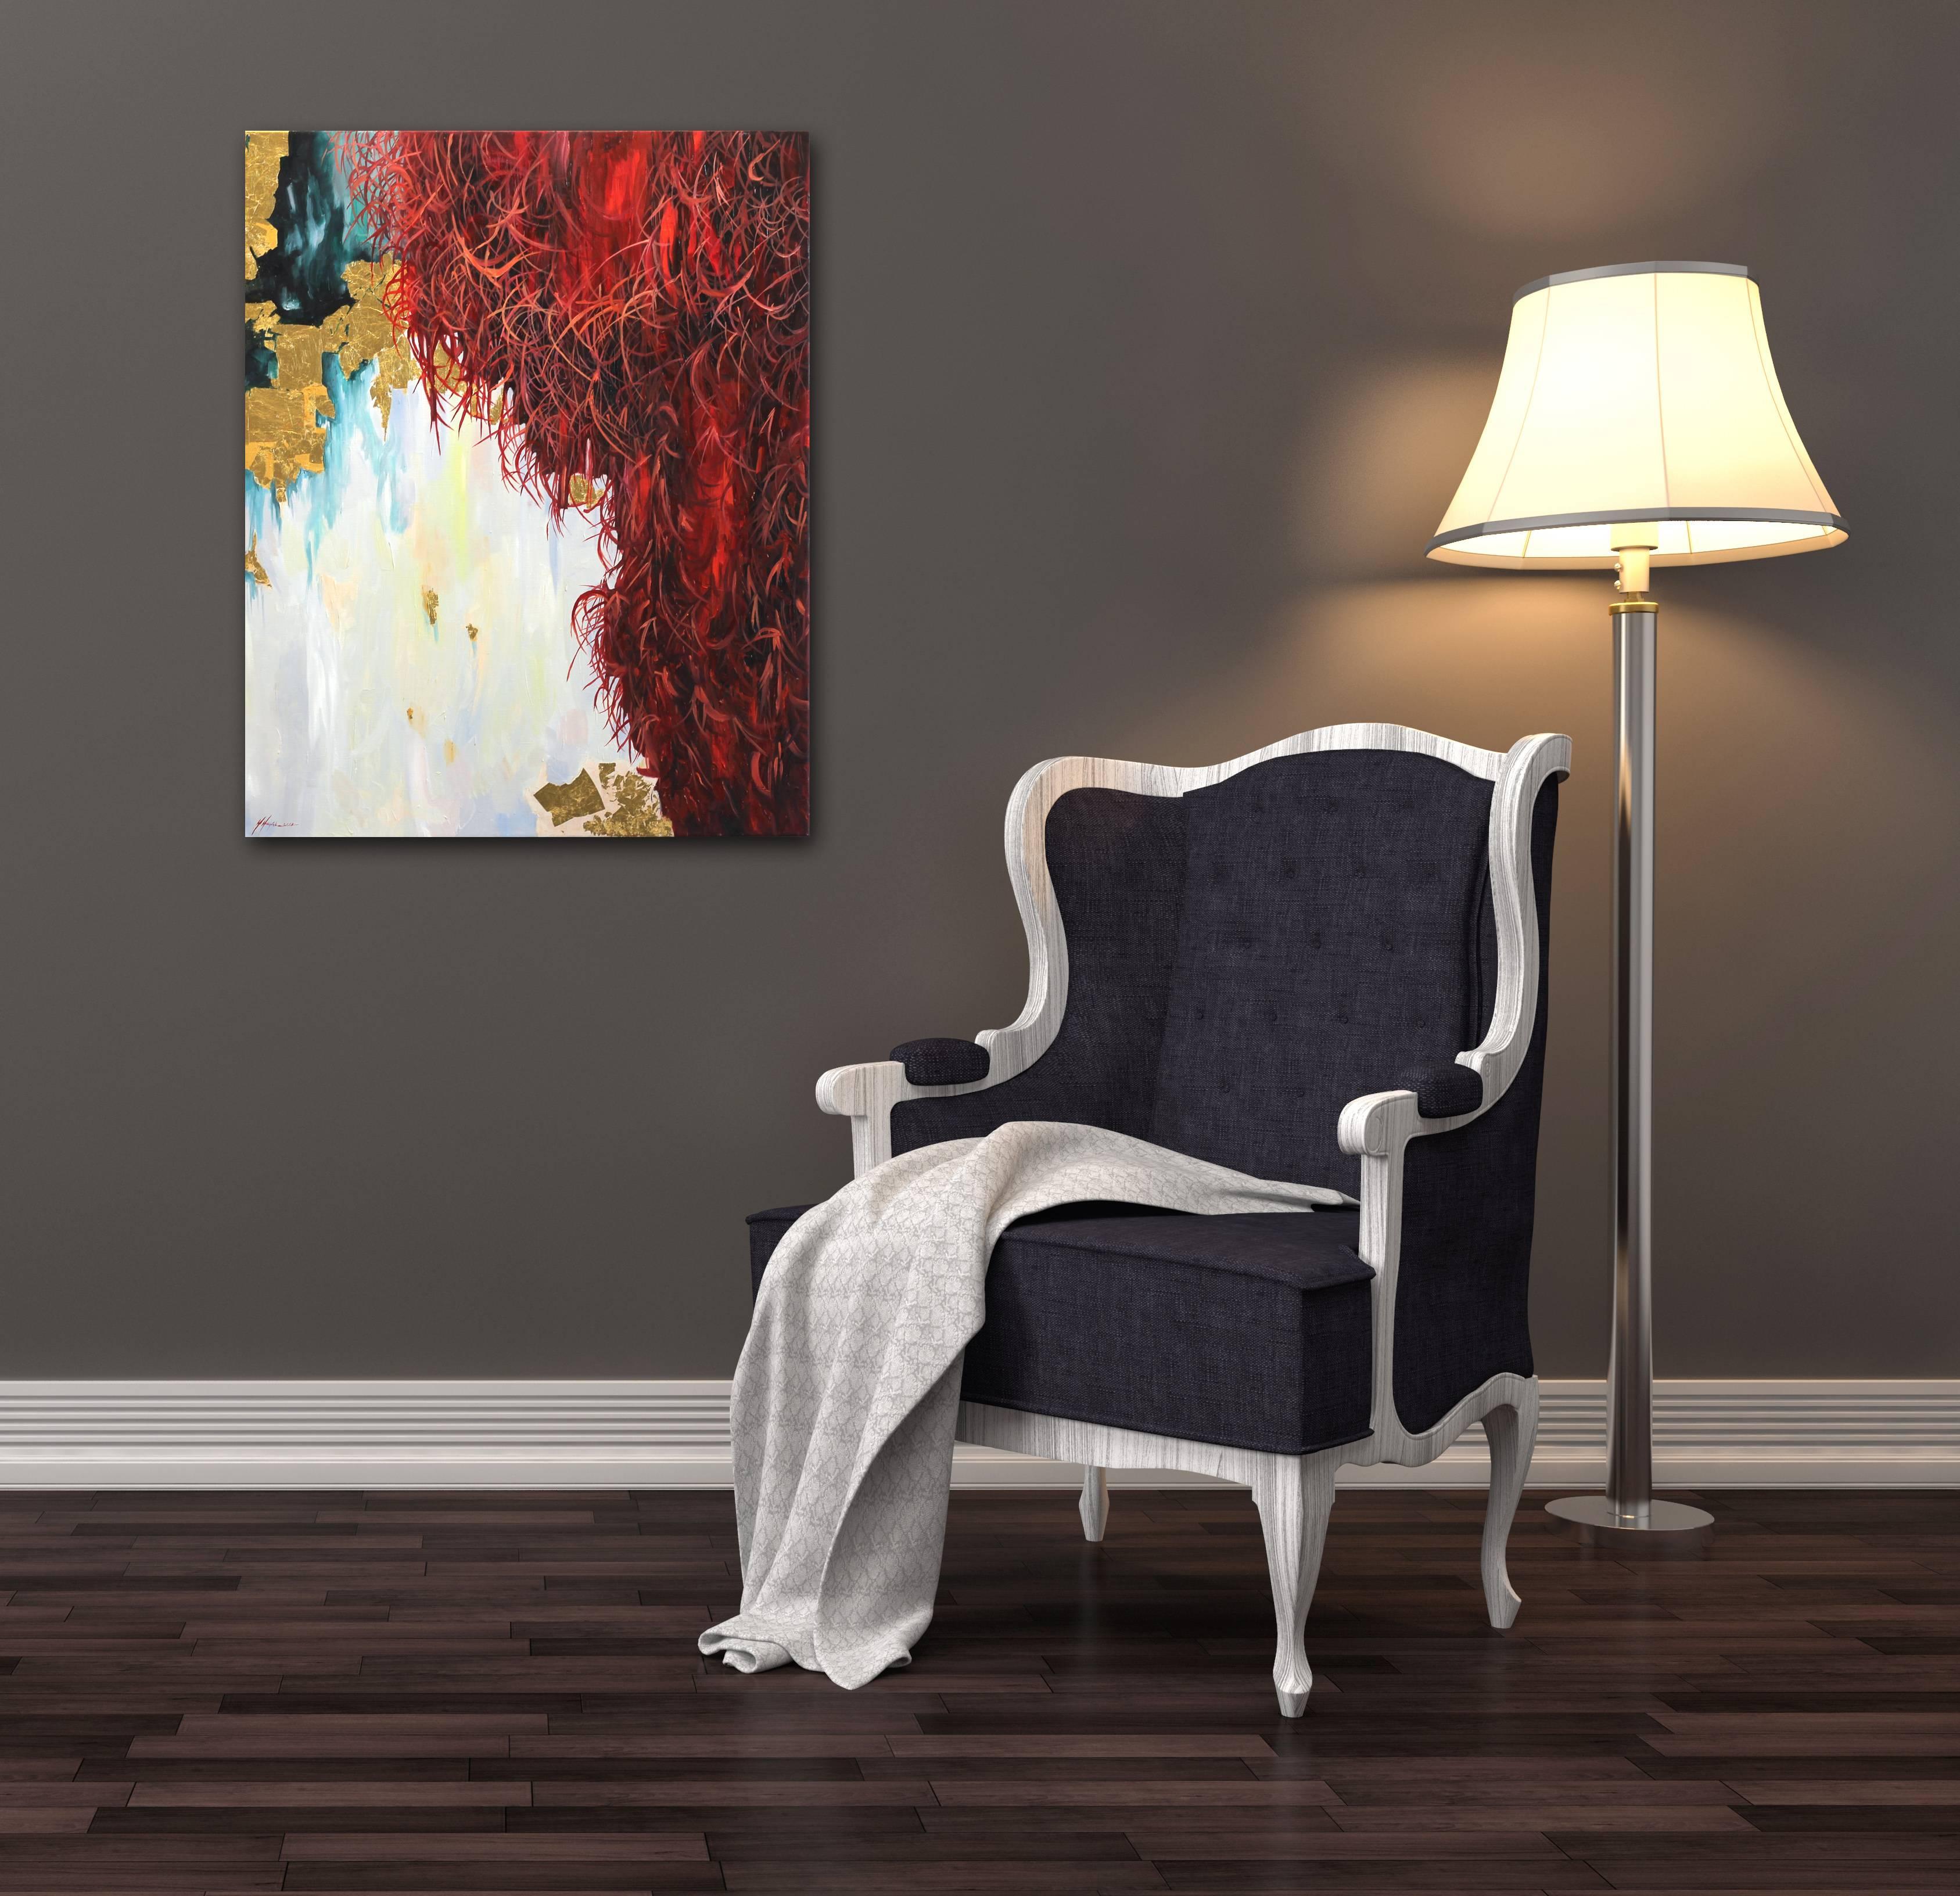 Flash - Abstract Red and Gold Painting on Canvas - Brown Abstract Painting by Marta Muszynska